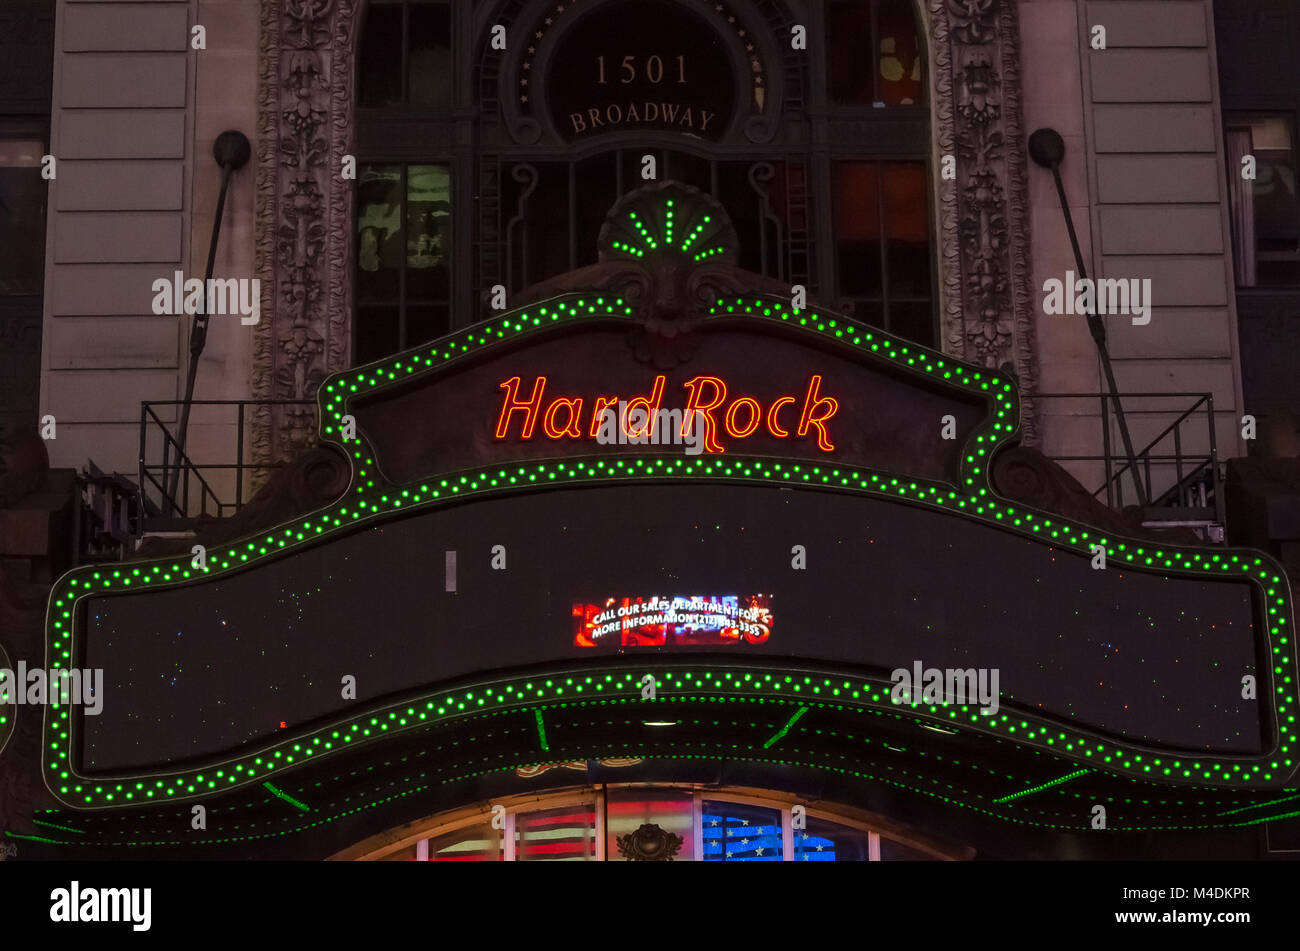 Illuminated facades of Broadway stores and theaters Stock Photo